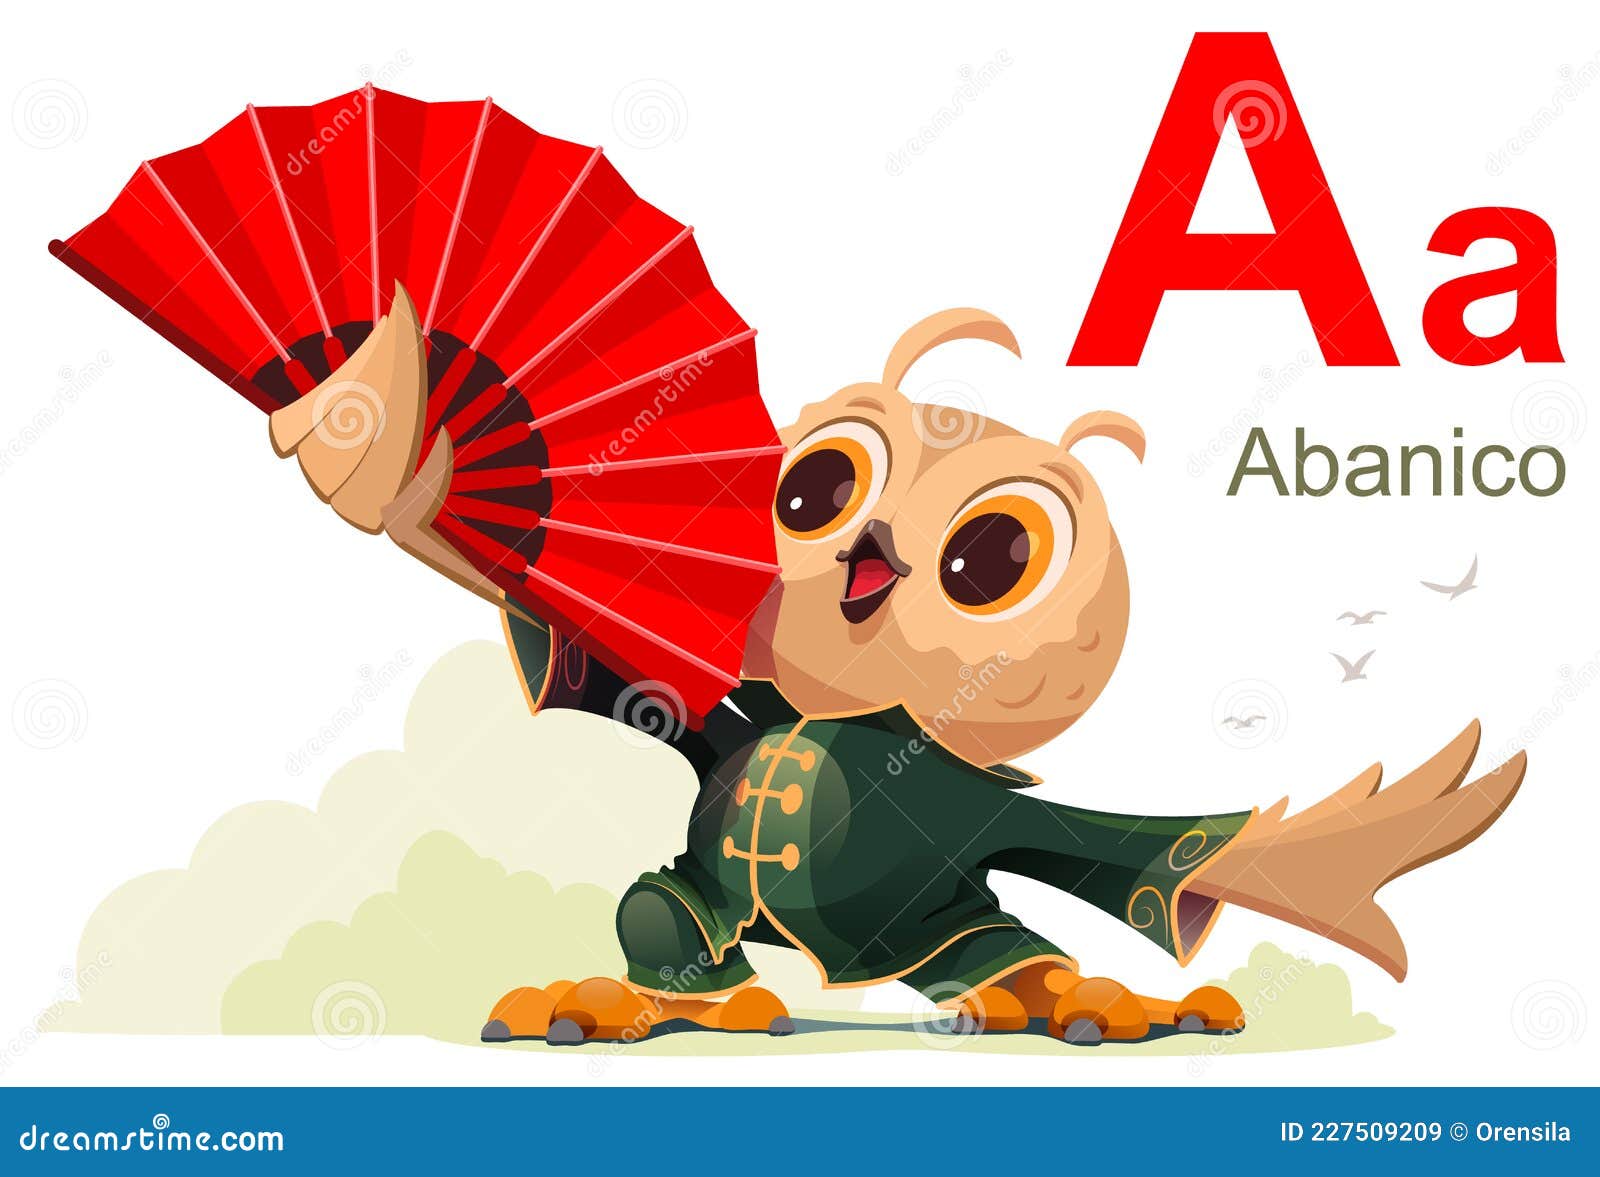 spanish alphabet letter a word abanico fan translated from spanish